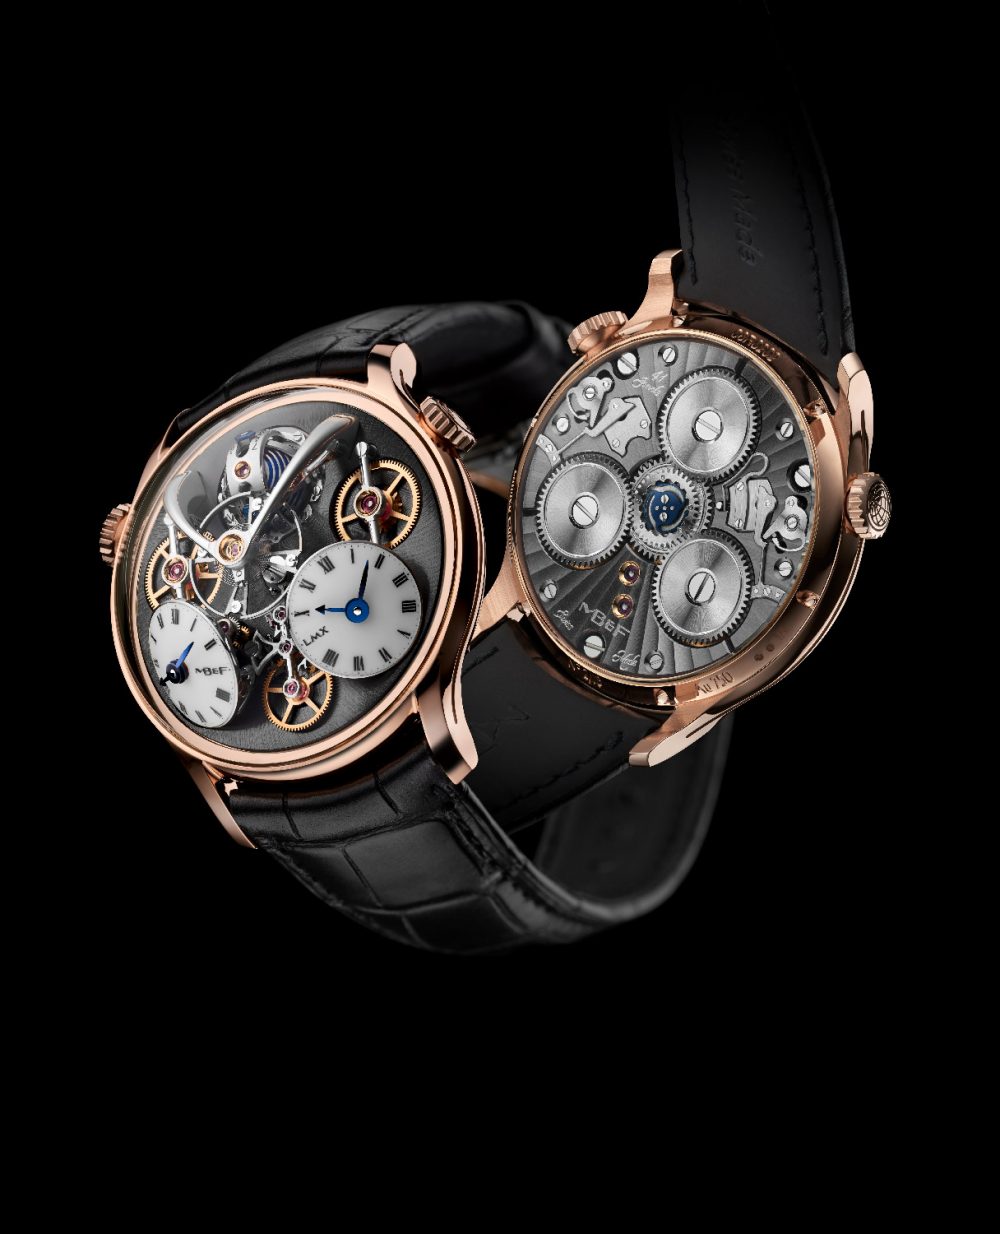 MB&F celebrates 10 Years of its Legacy Machines With LMX model